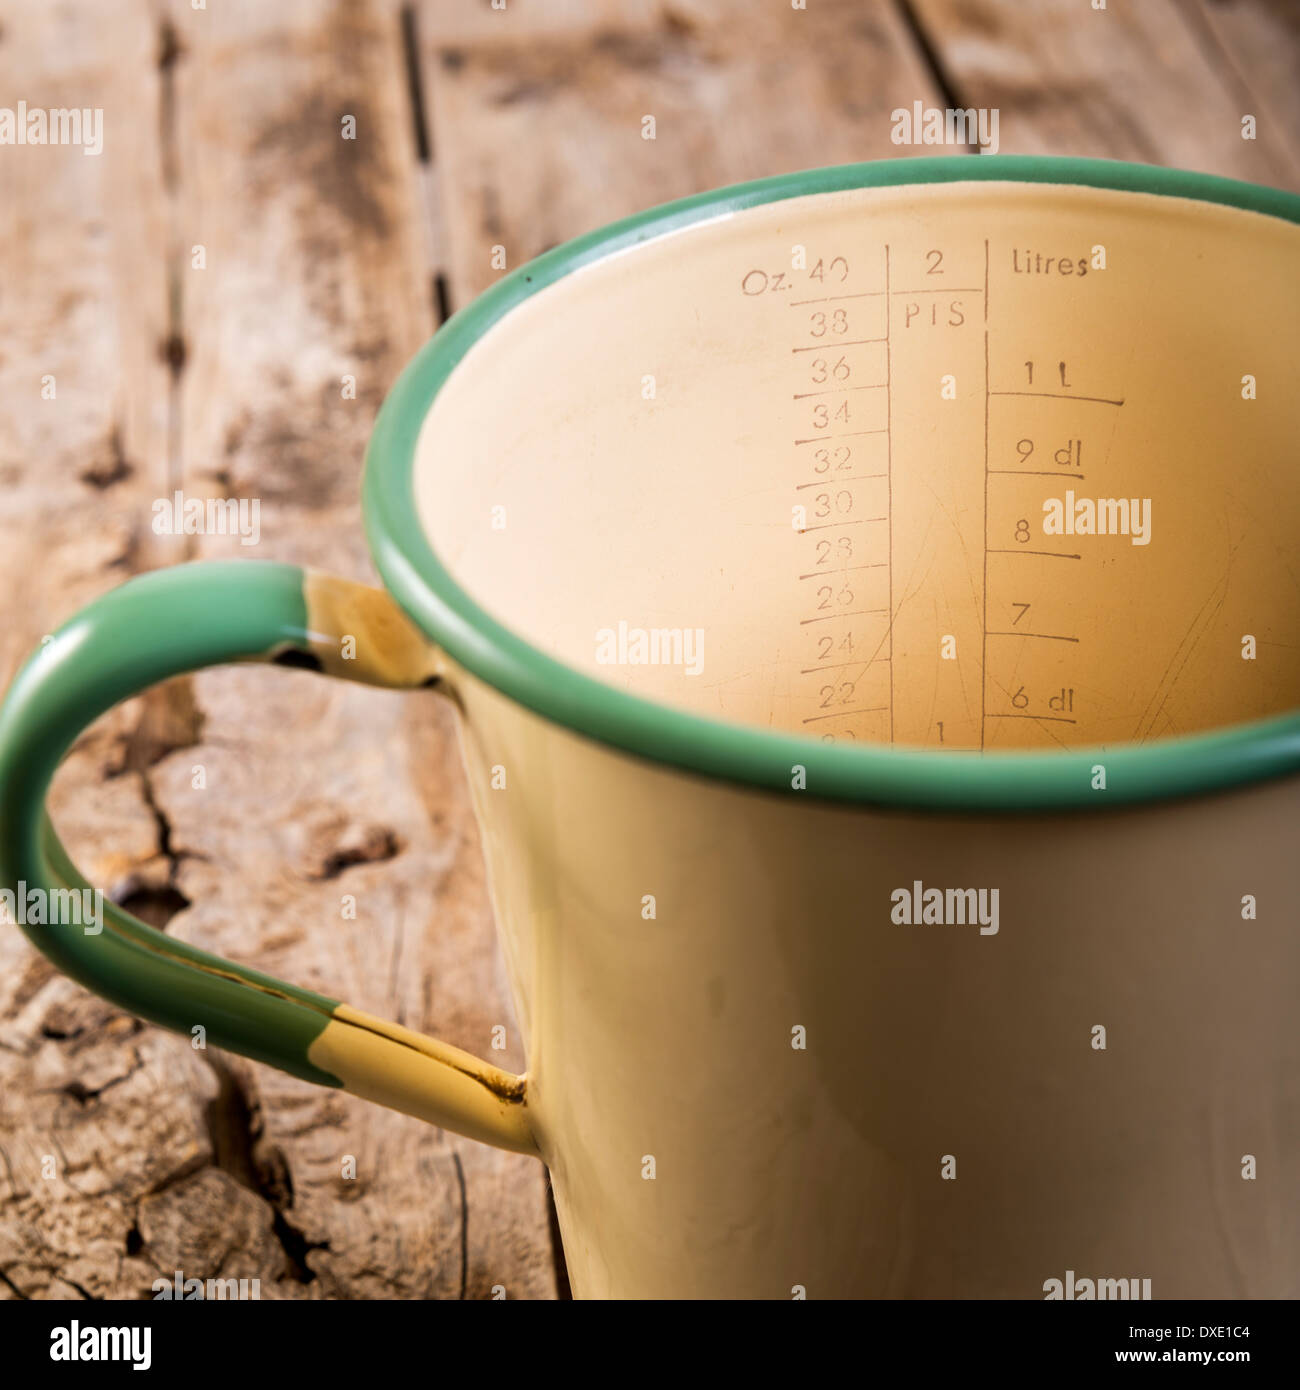 https://c8.alamy.com/comp/DXE1C4/classic-old-measuring-jug-in-vintage-colours-in-shallow-focus-on-a-DXE1C4.jpg